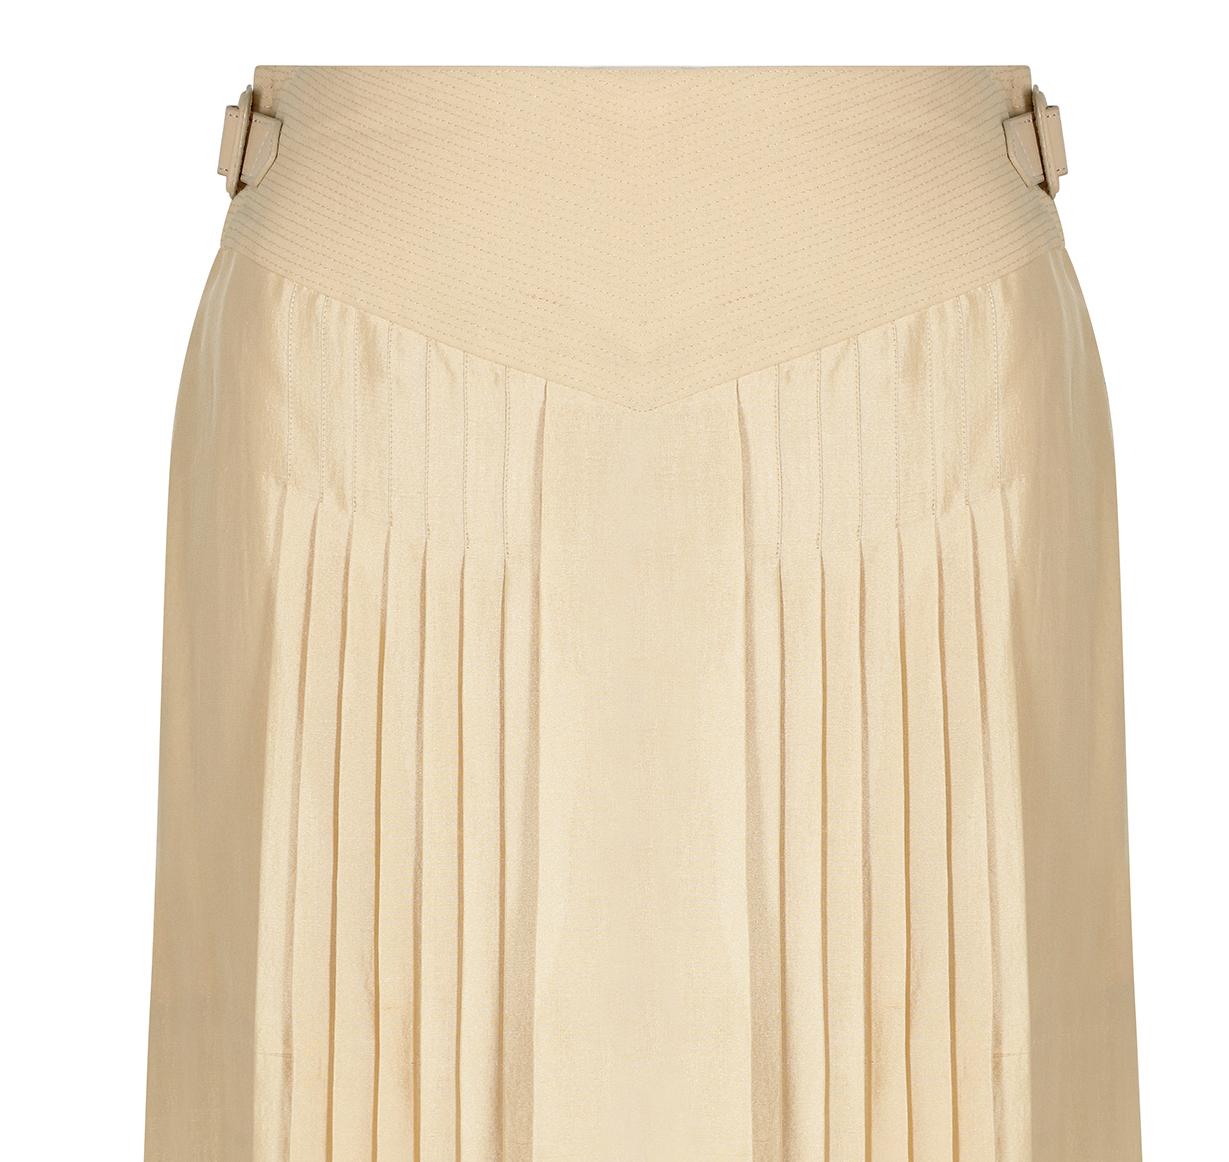 Hermes Beige Natural Silk and Leather Accordion Pleat Skirt 1